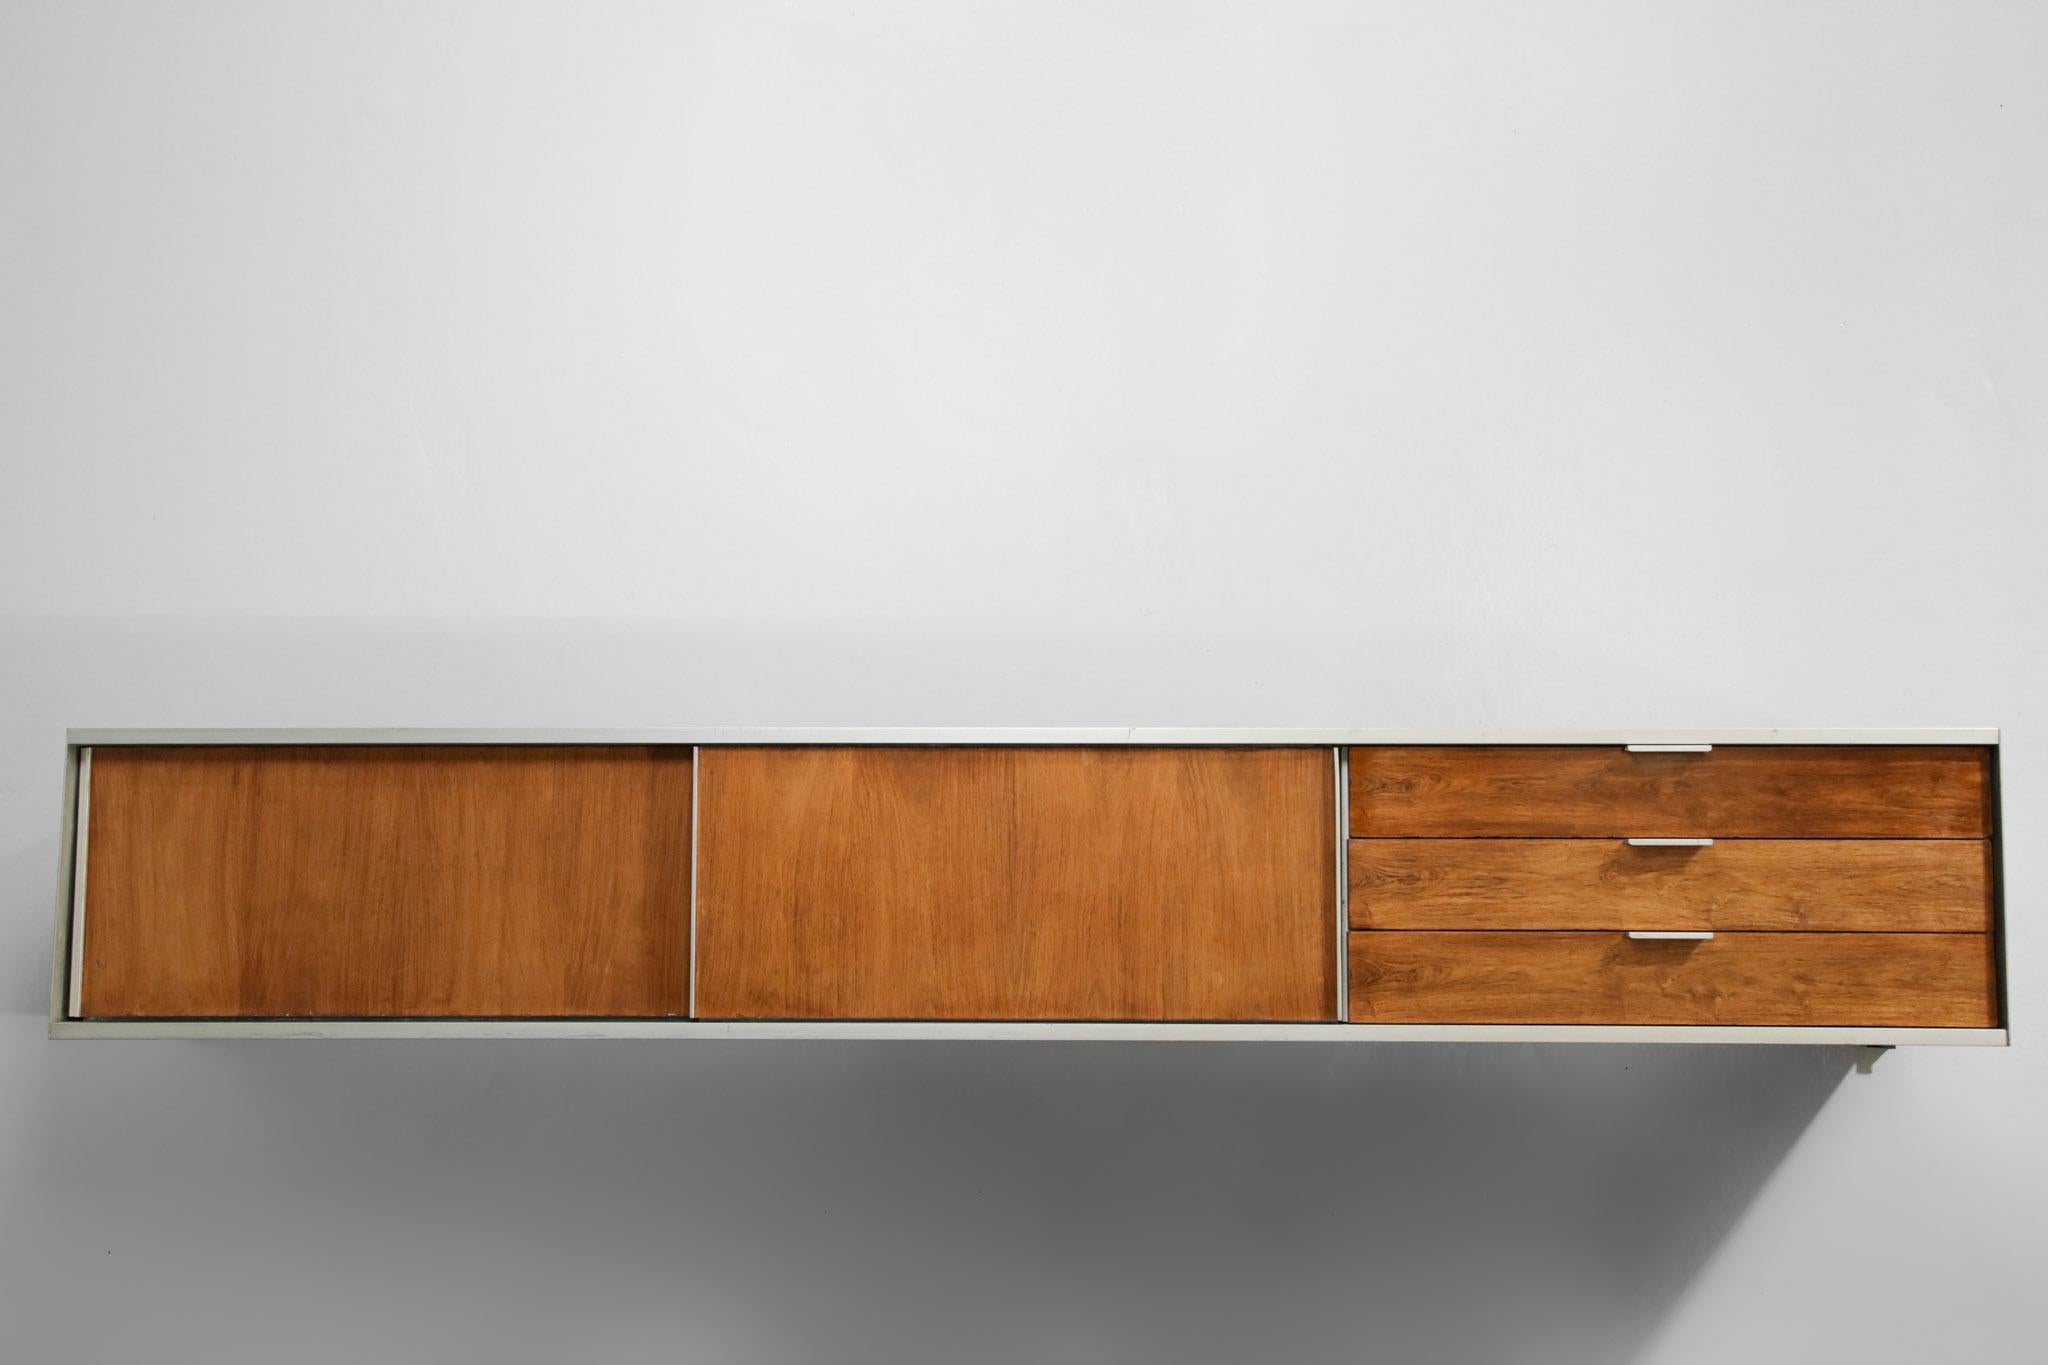 European Large Wall Mounted Sideboard by Georges Frydman for Efa